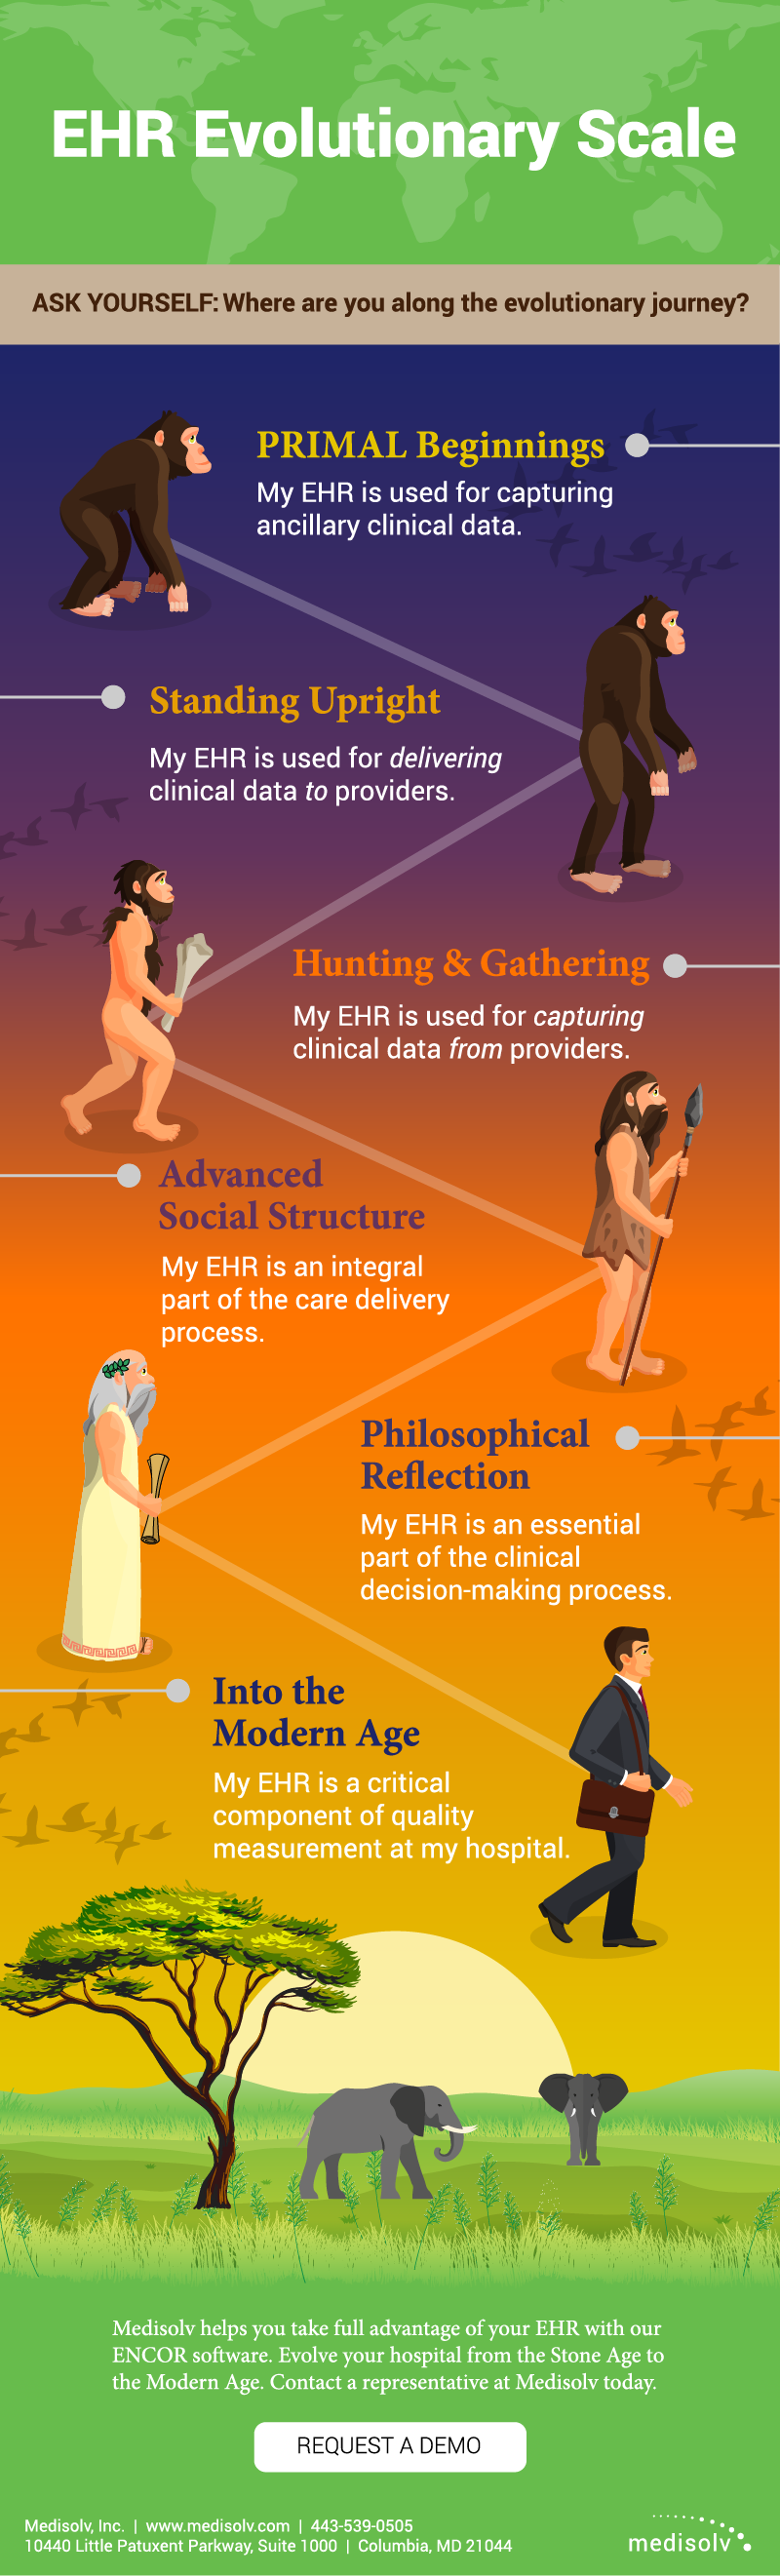 EHR-Evolutionary-Scale-final-01.png